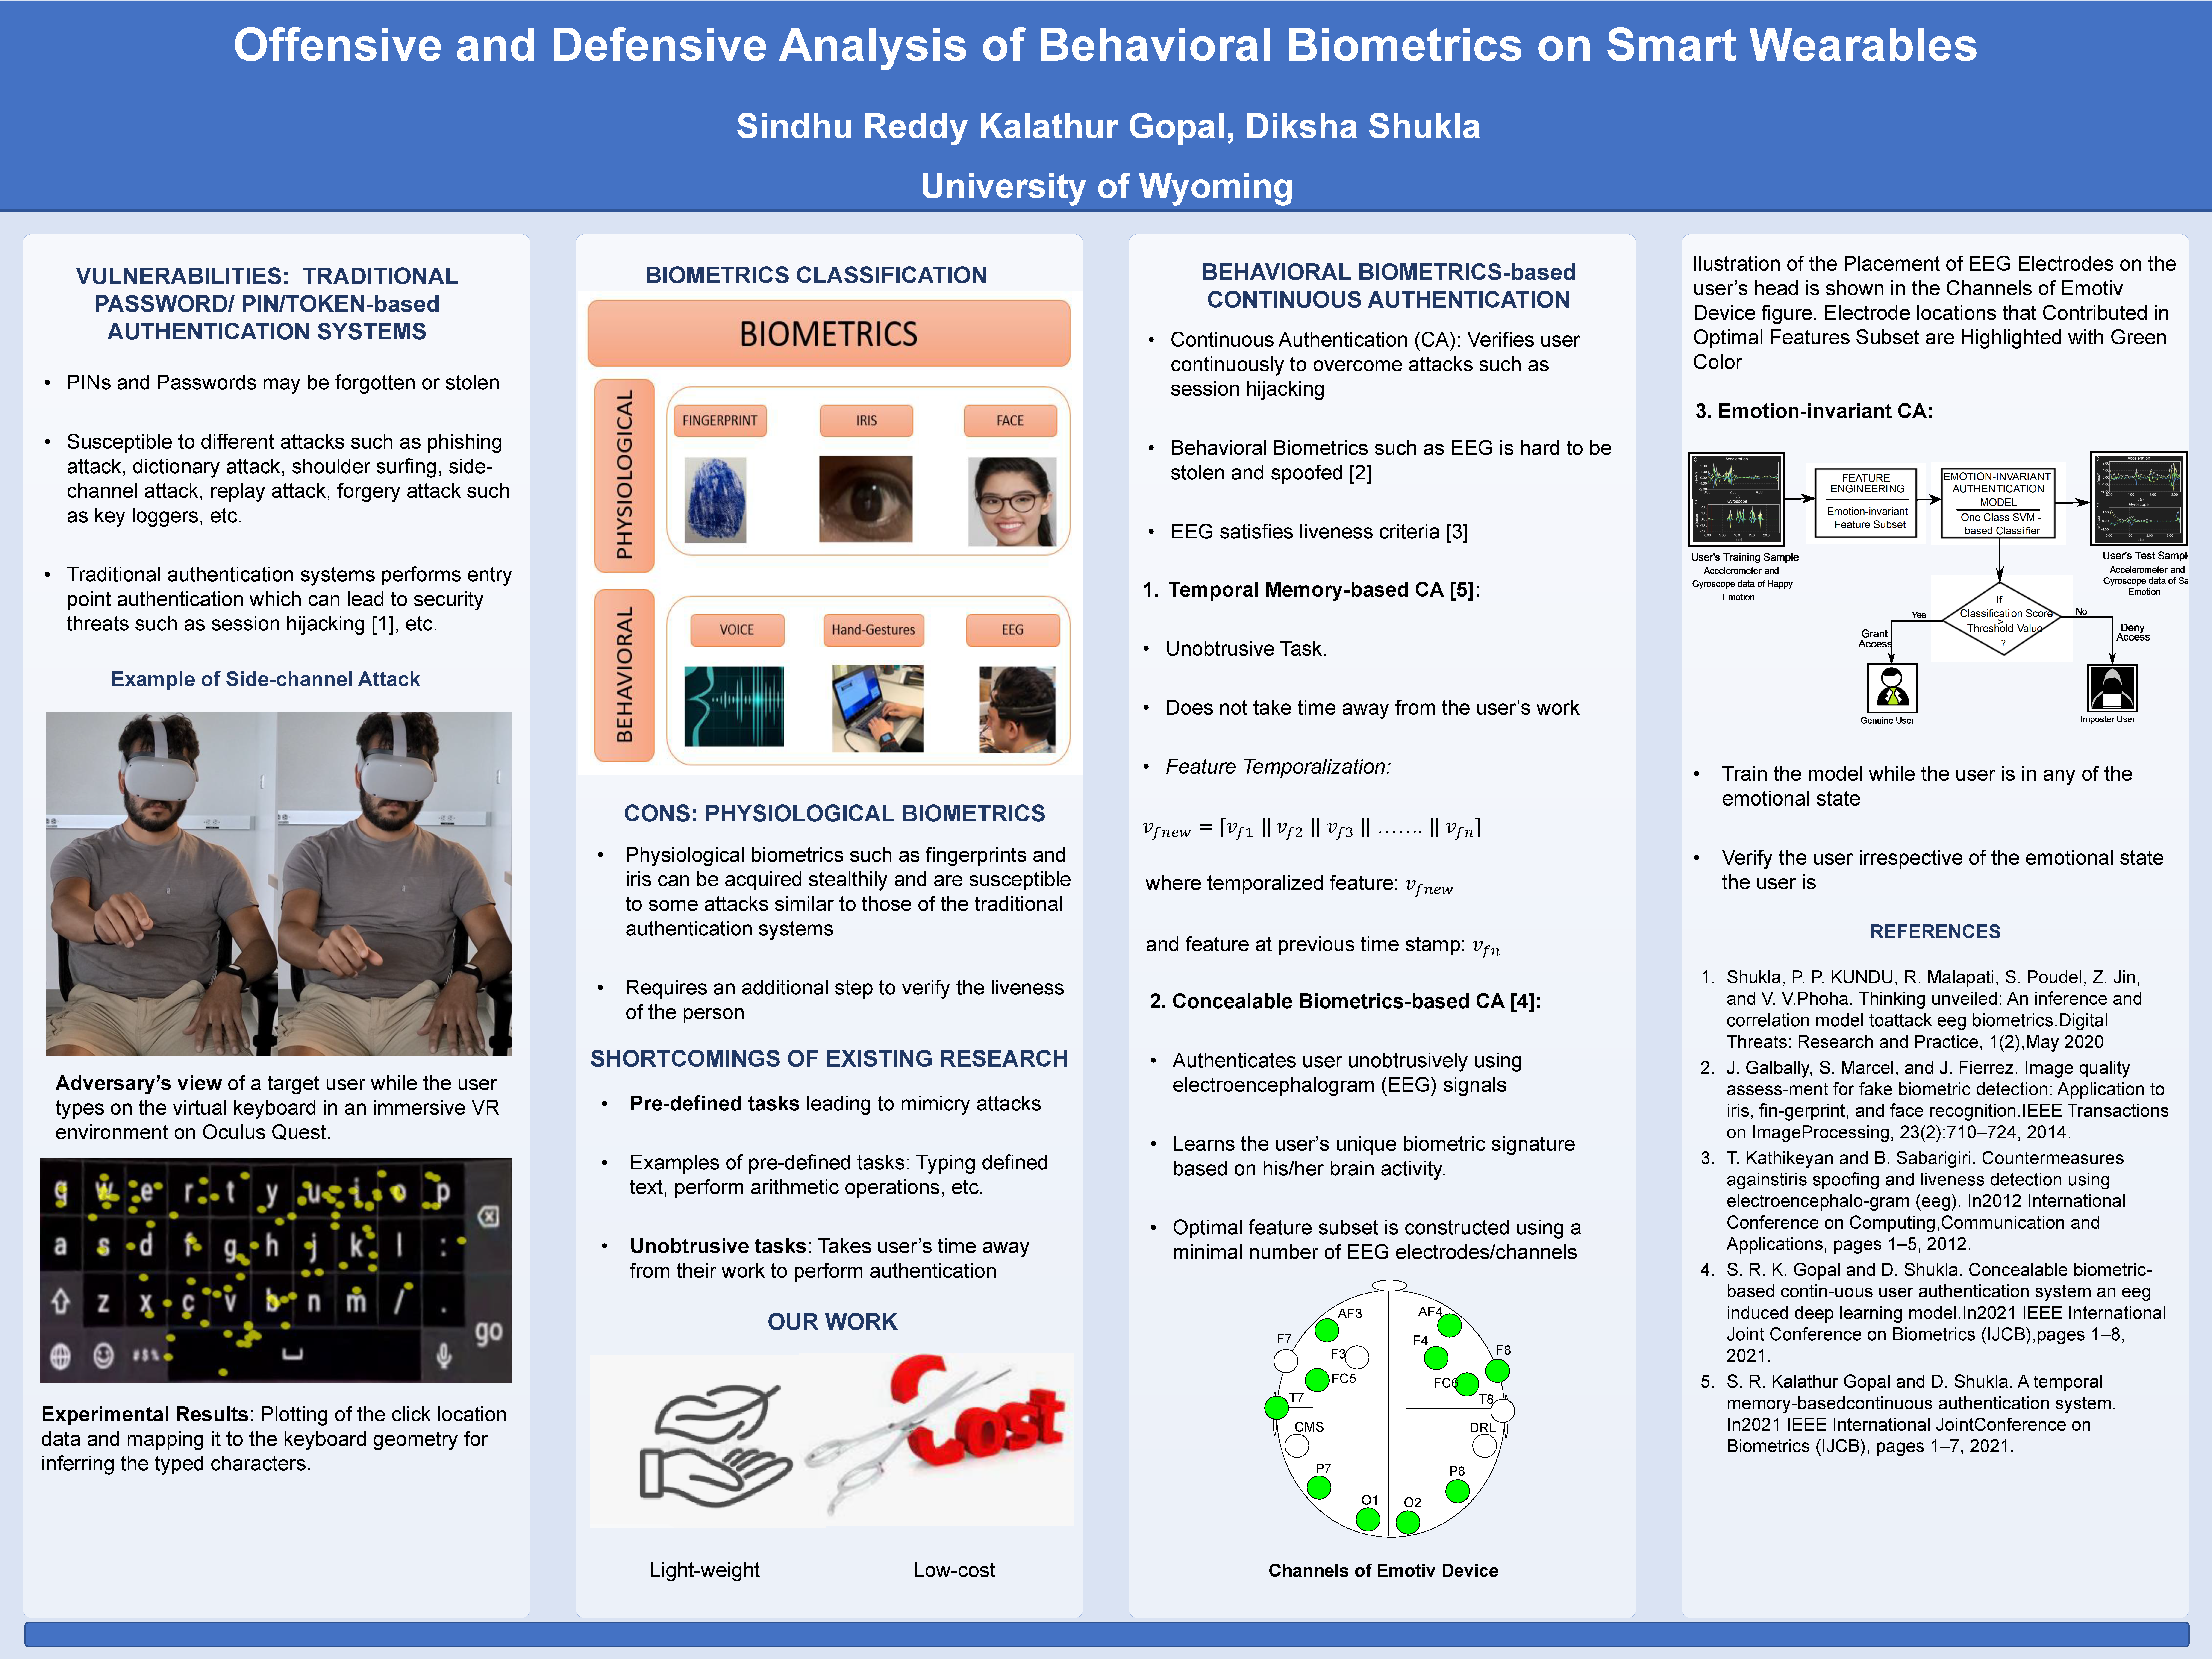  Poster for Offensive and Defensive Analysis of Behavioral Biometrics on Smart Wearables